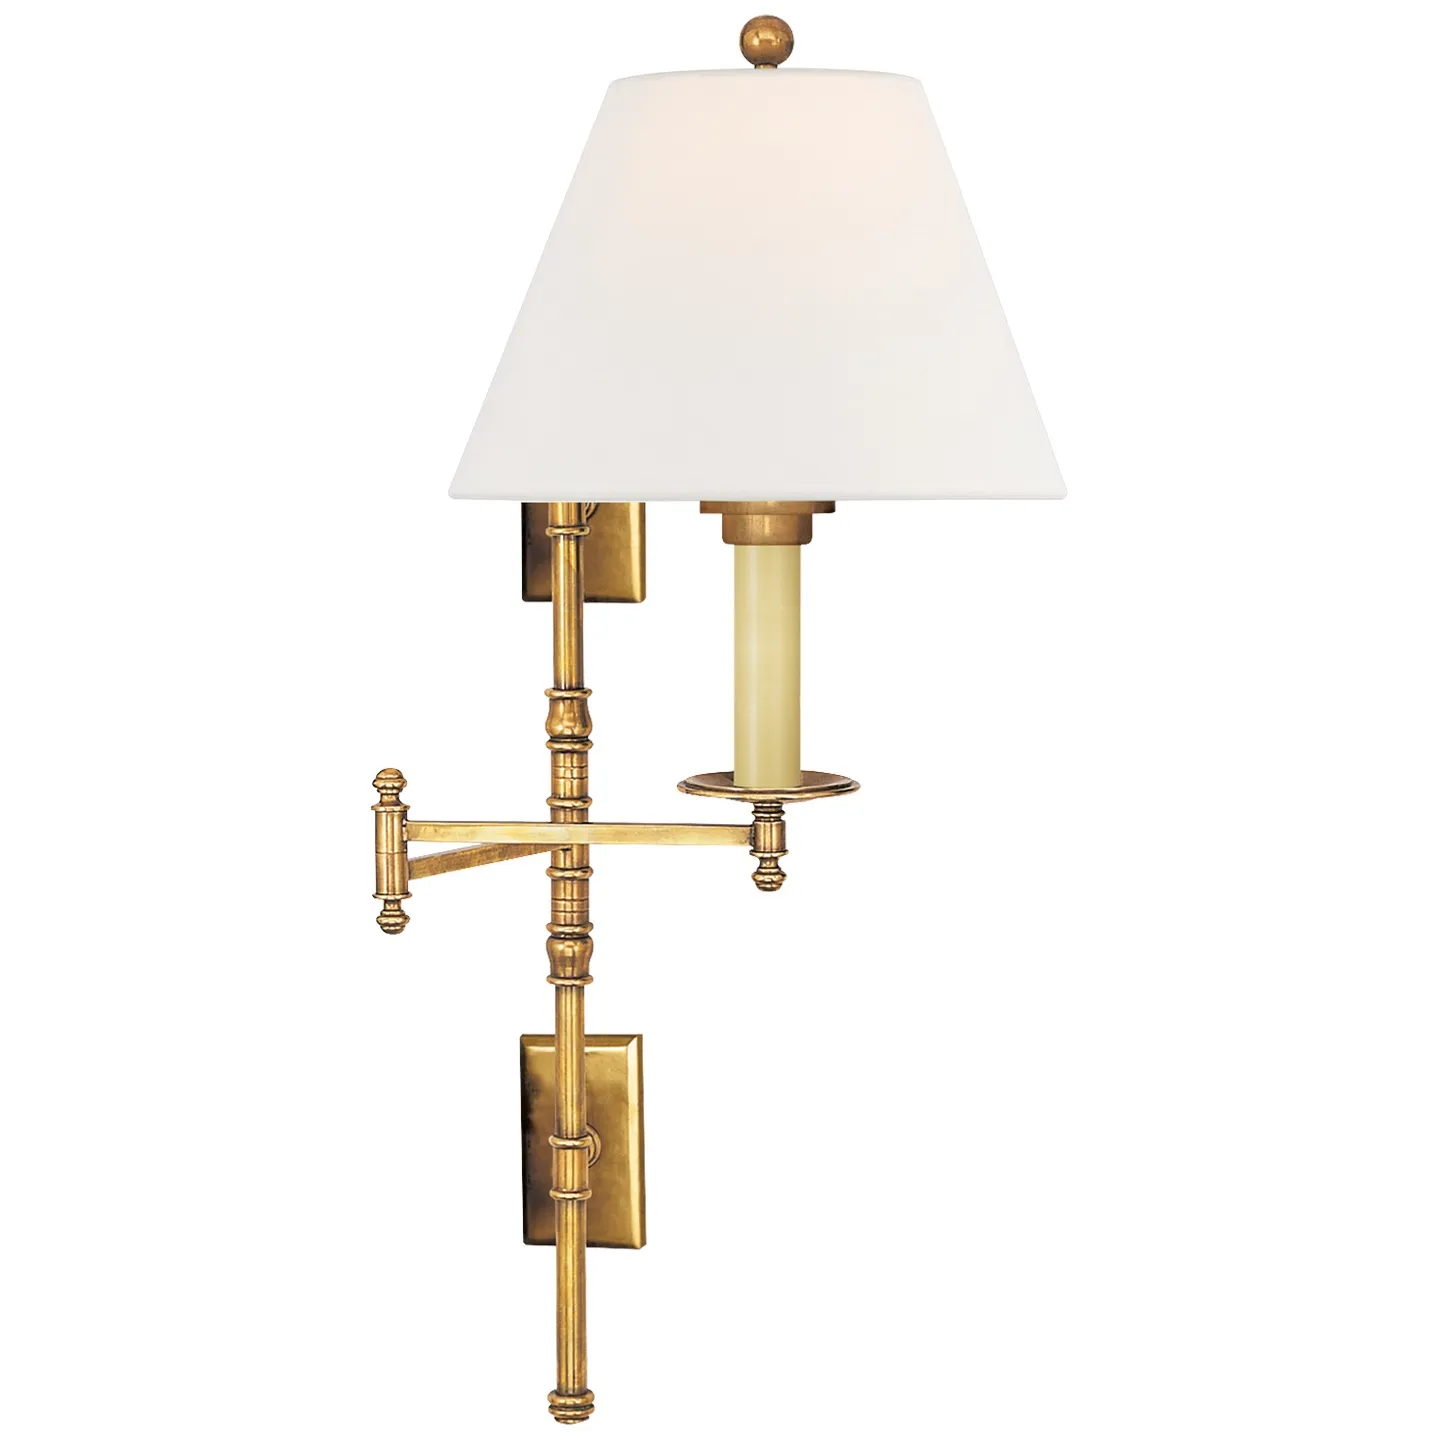 Dorchester Double Backplate Swing Arm in Antique-Burnished Brass with Linen Shade